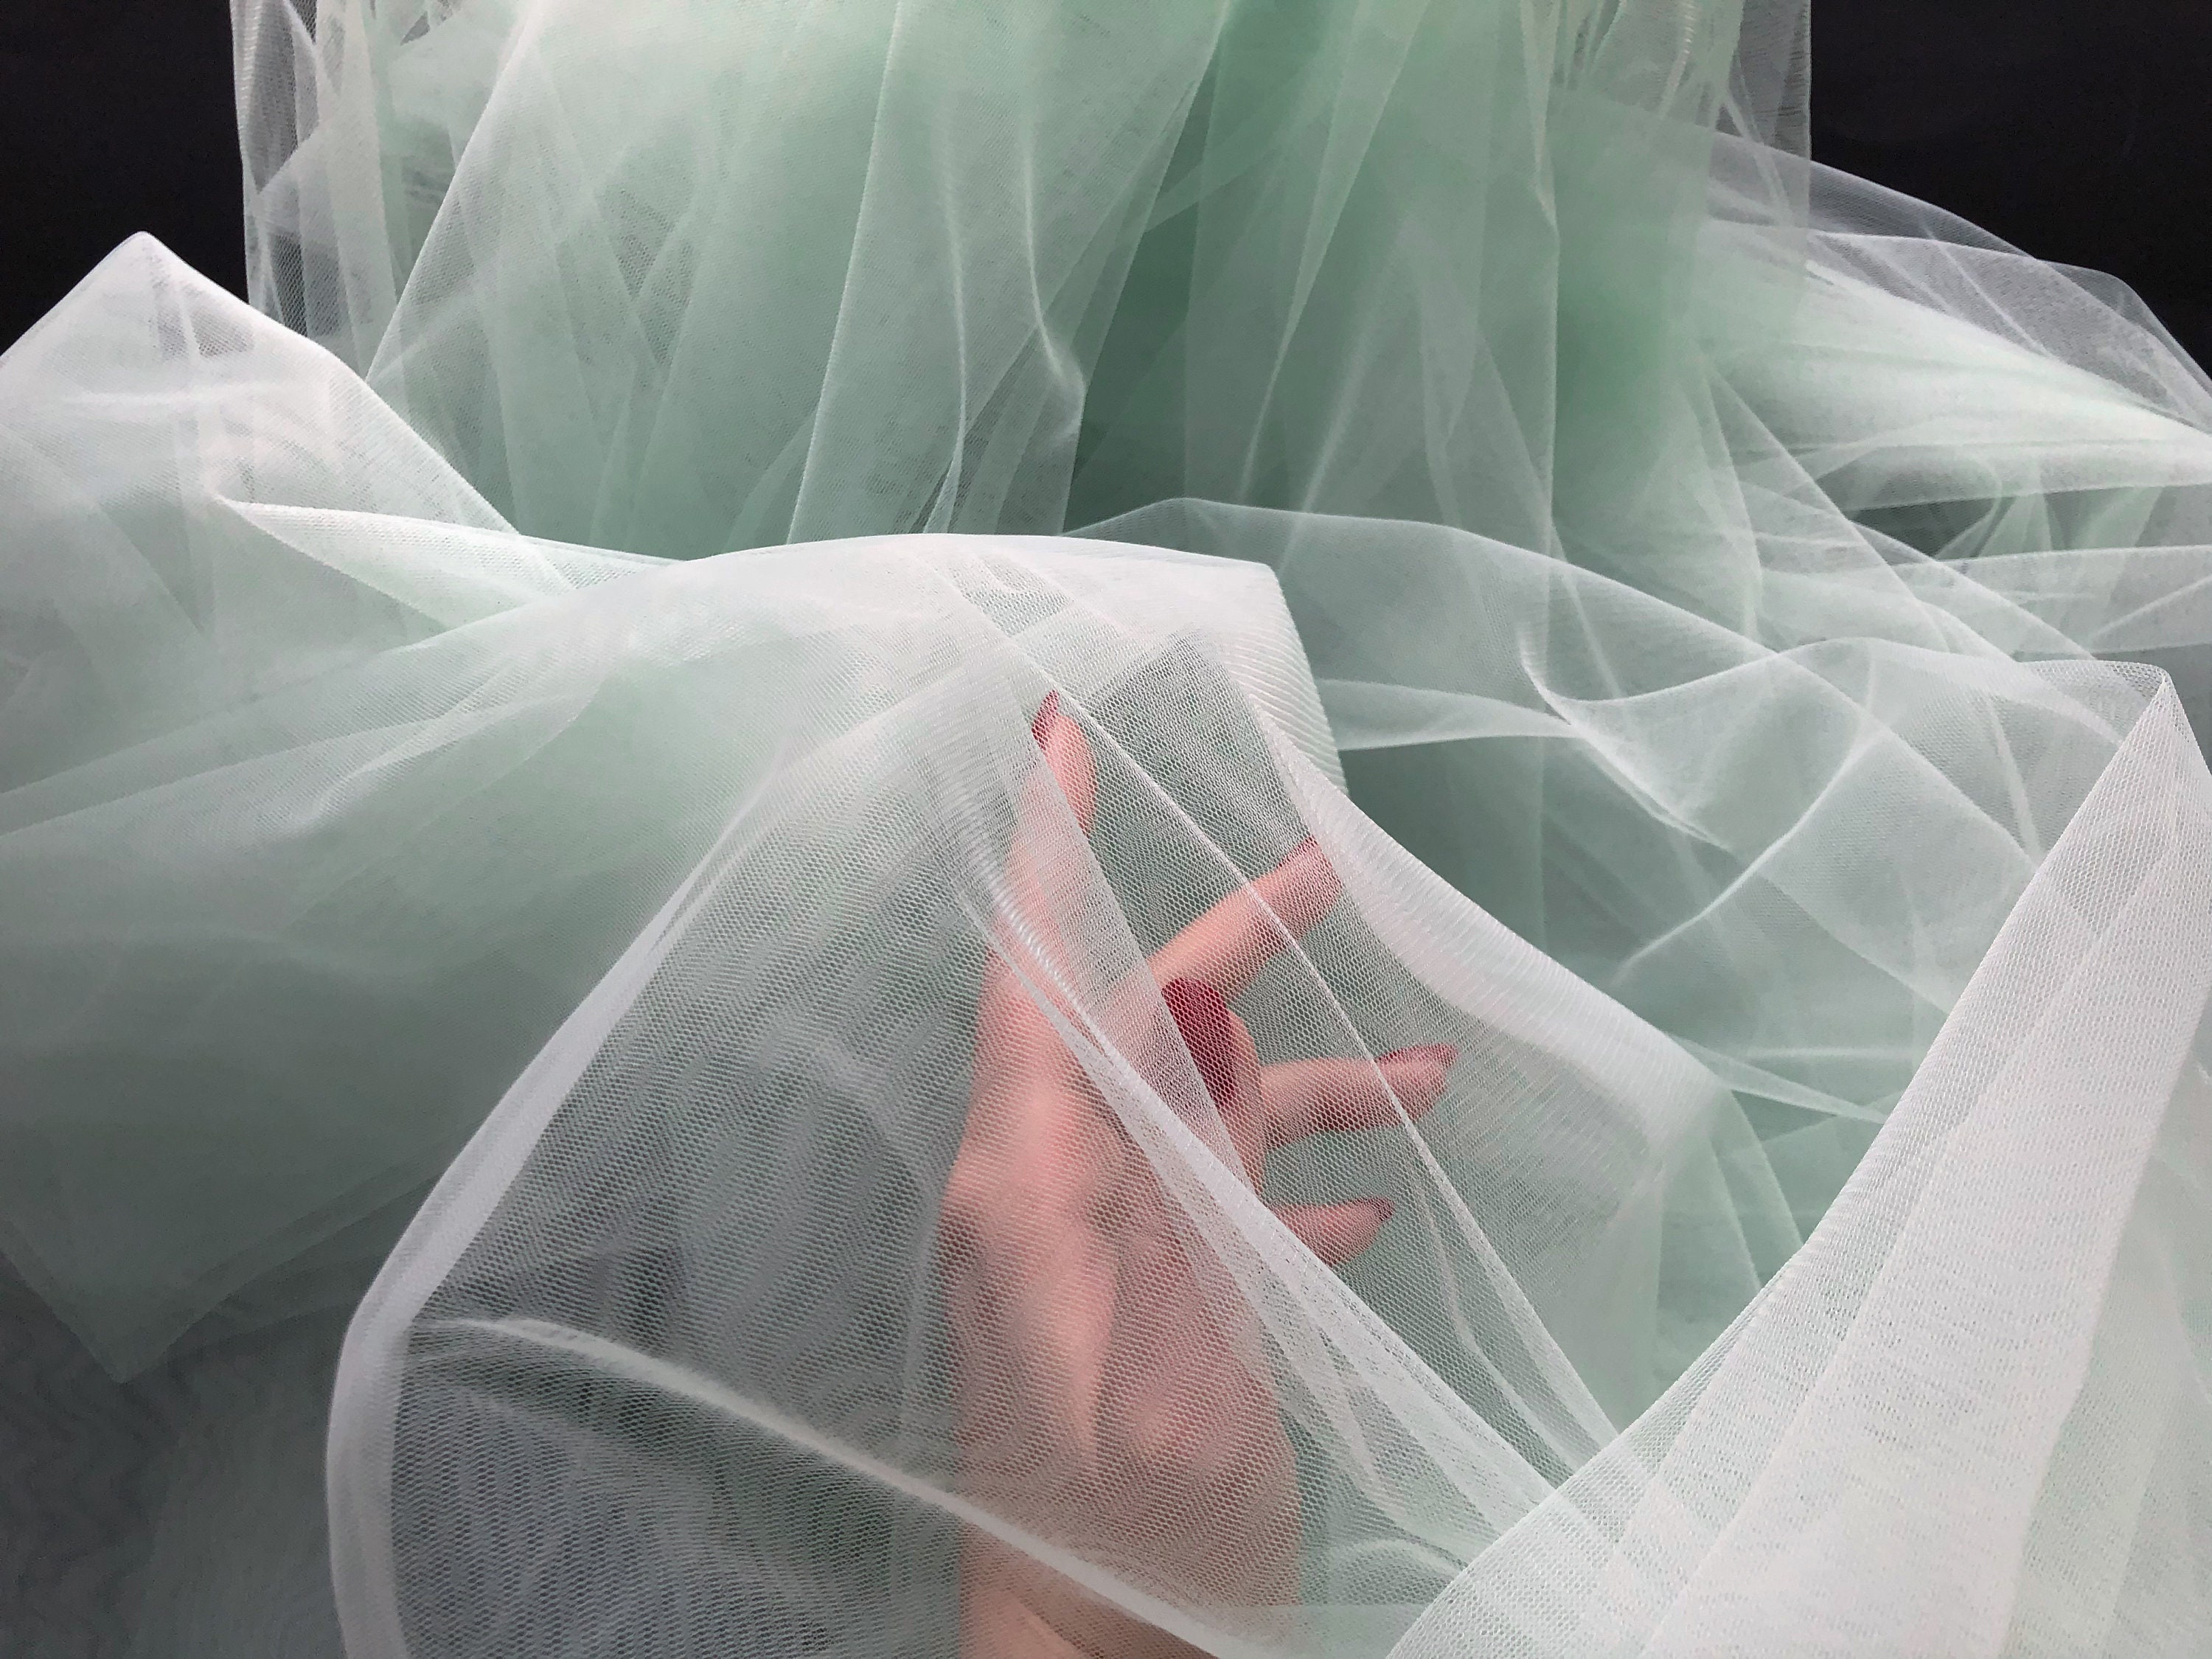 5m of 150mm Wide Soft Nylon Lime Green Tulle Net Fabric Wedding/Tutu/Crafts 